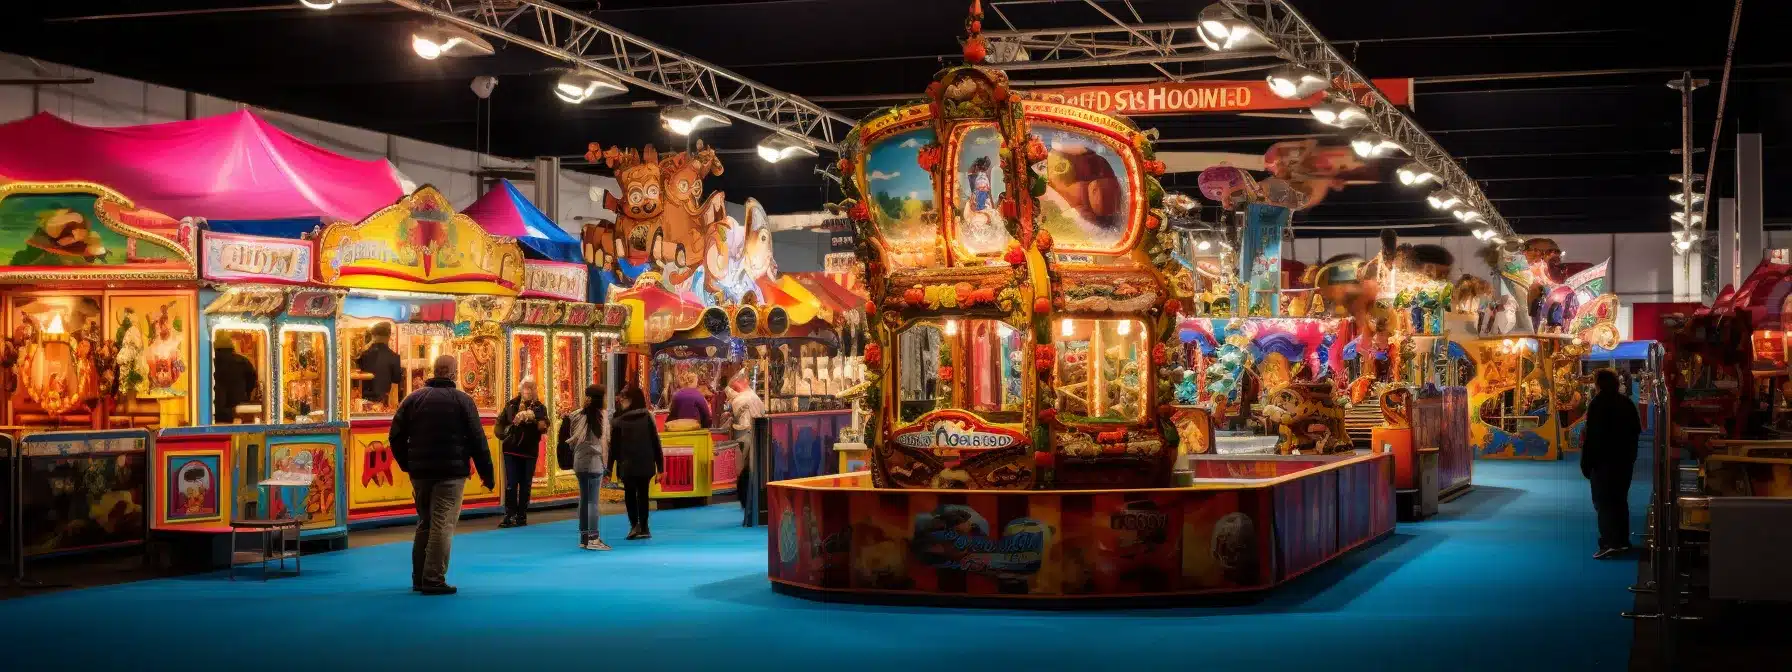 A Vibrant Fairground With A Colorful And Enticing Brand Stall, Attracting A Crowd Of Enamored Customers.